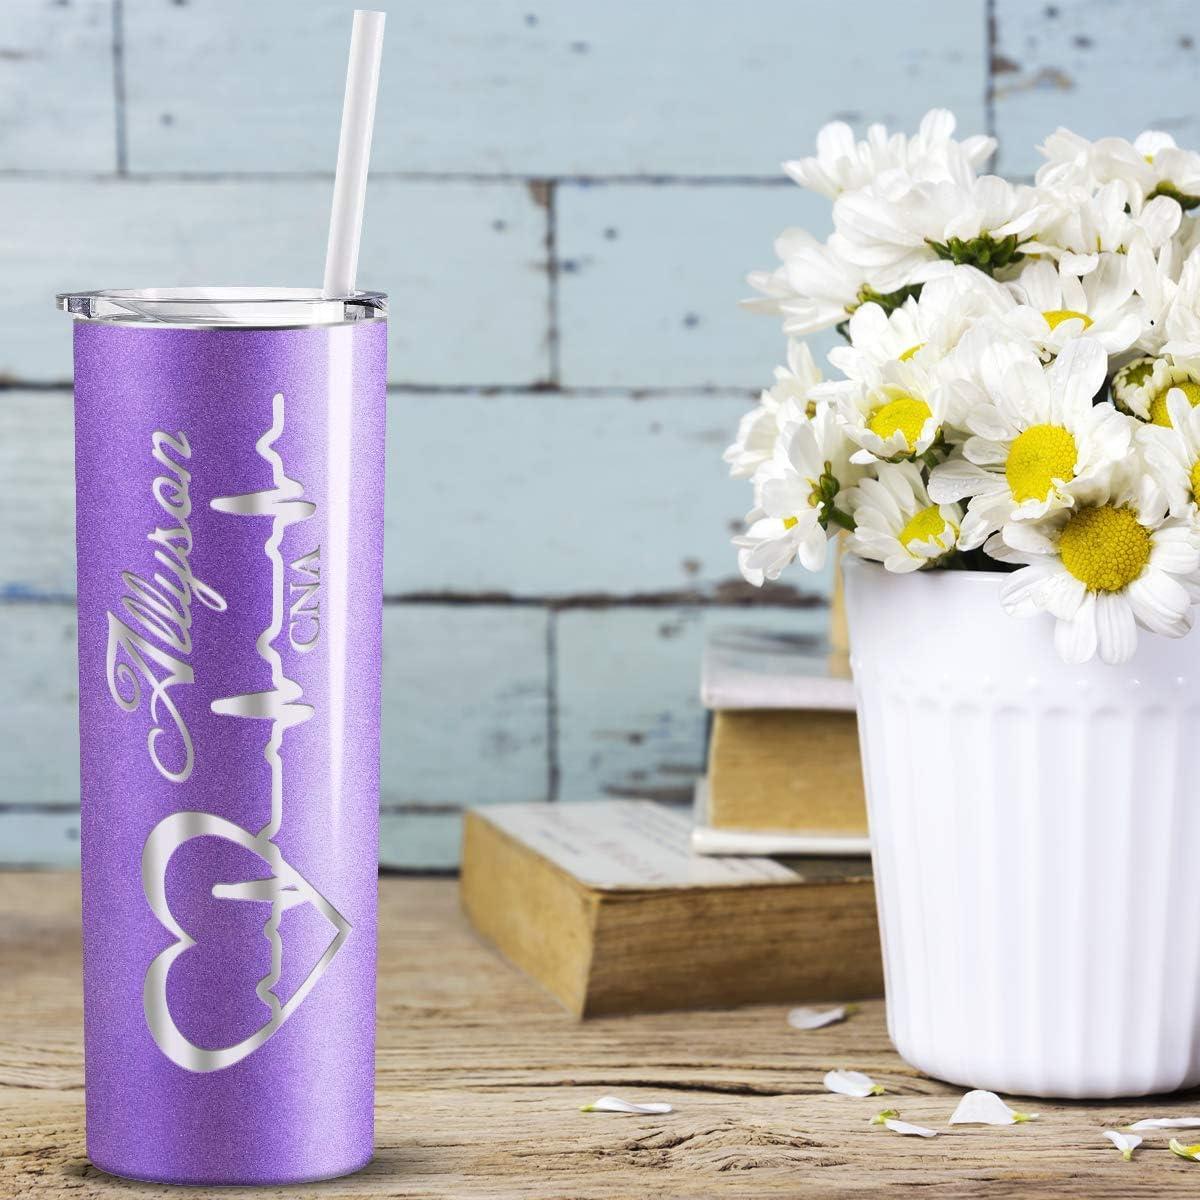 20 oz Skinny Tumbler with Straw - Design Your Own Mug - Customizable Photo  Products & Gifts